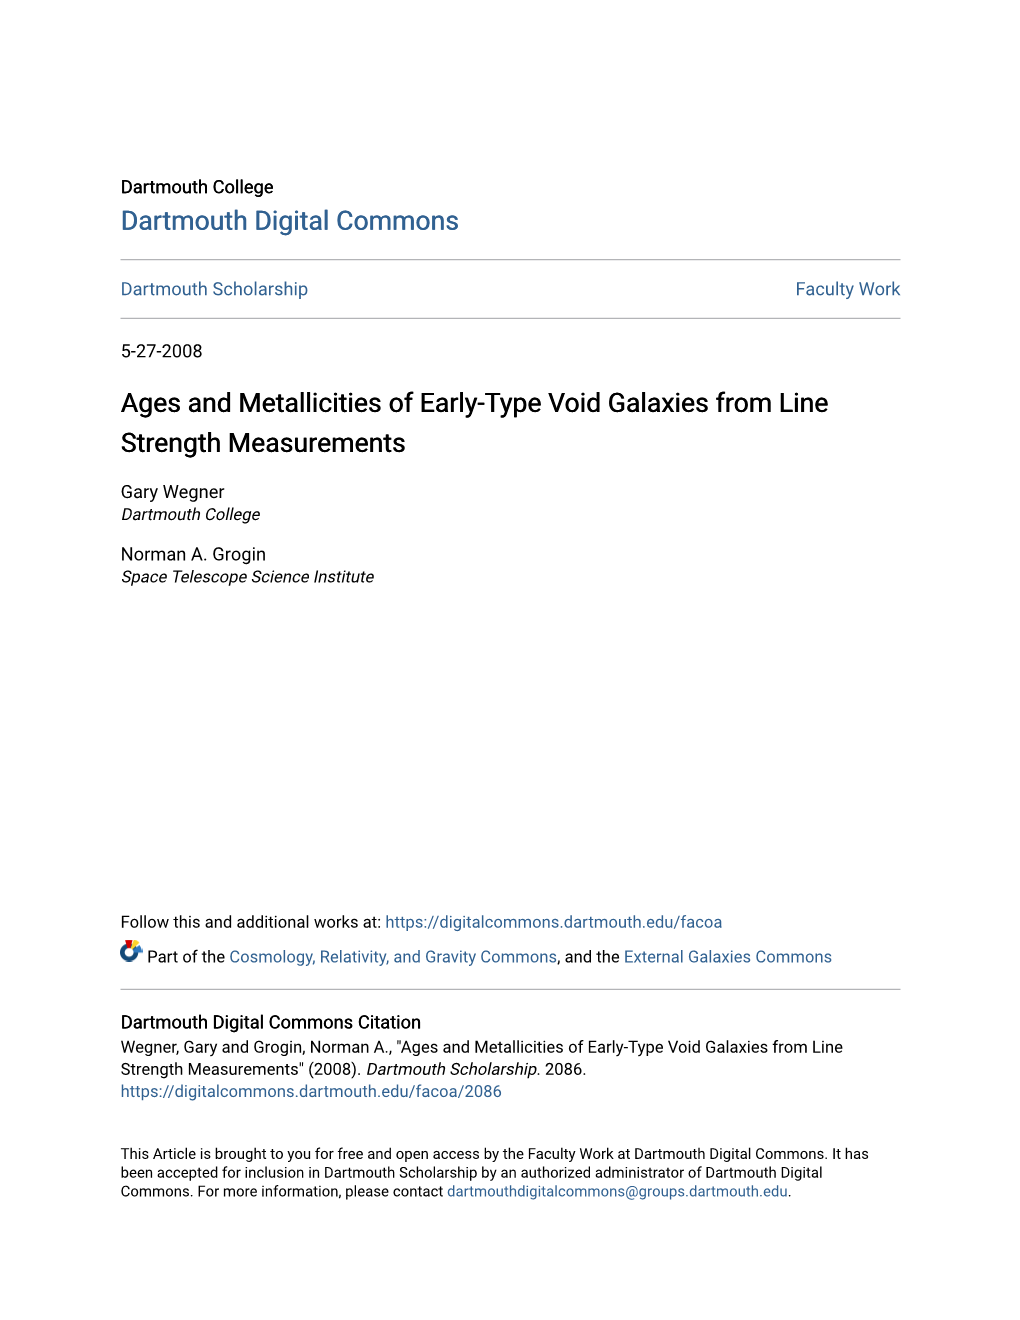 Ages and Metallicities of Early-Type Void Galaxies from Line Strength Measurements